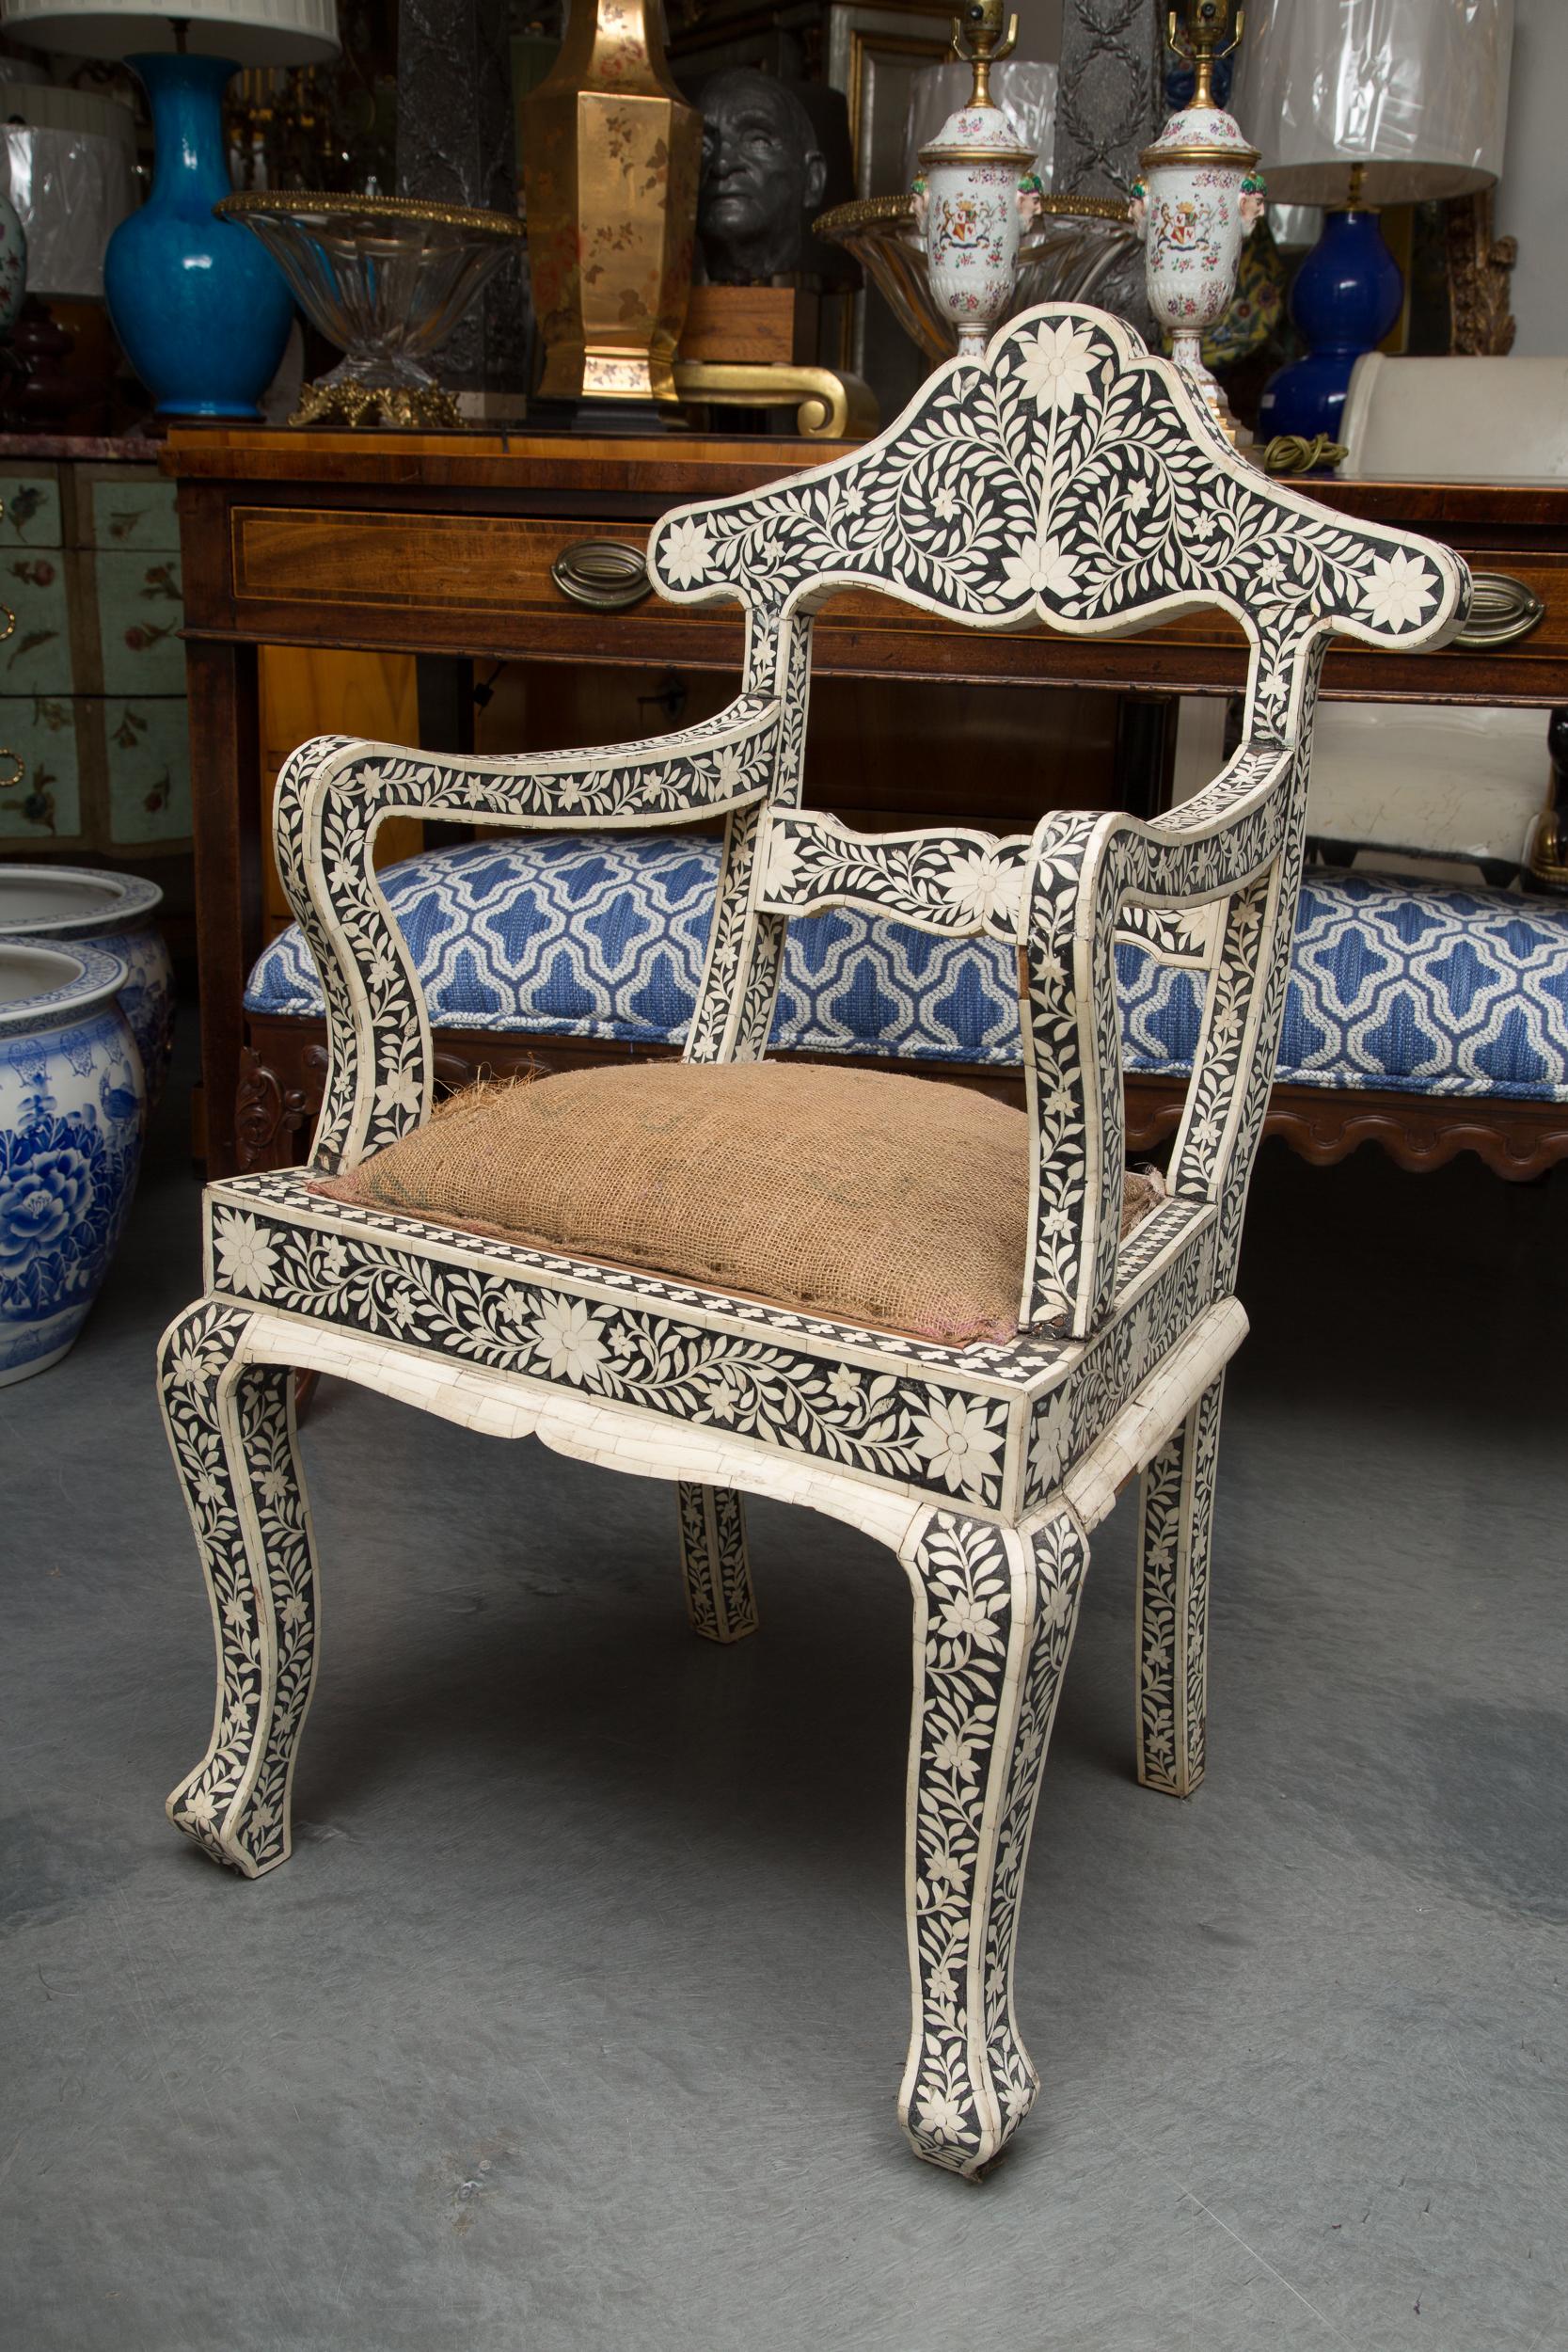 This is an exquisite pair of ebony Moroccan armchairs profusely inlaid with intricate bone. The overall design creates sprays of foliage and flower heads, circa 1920.